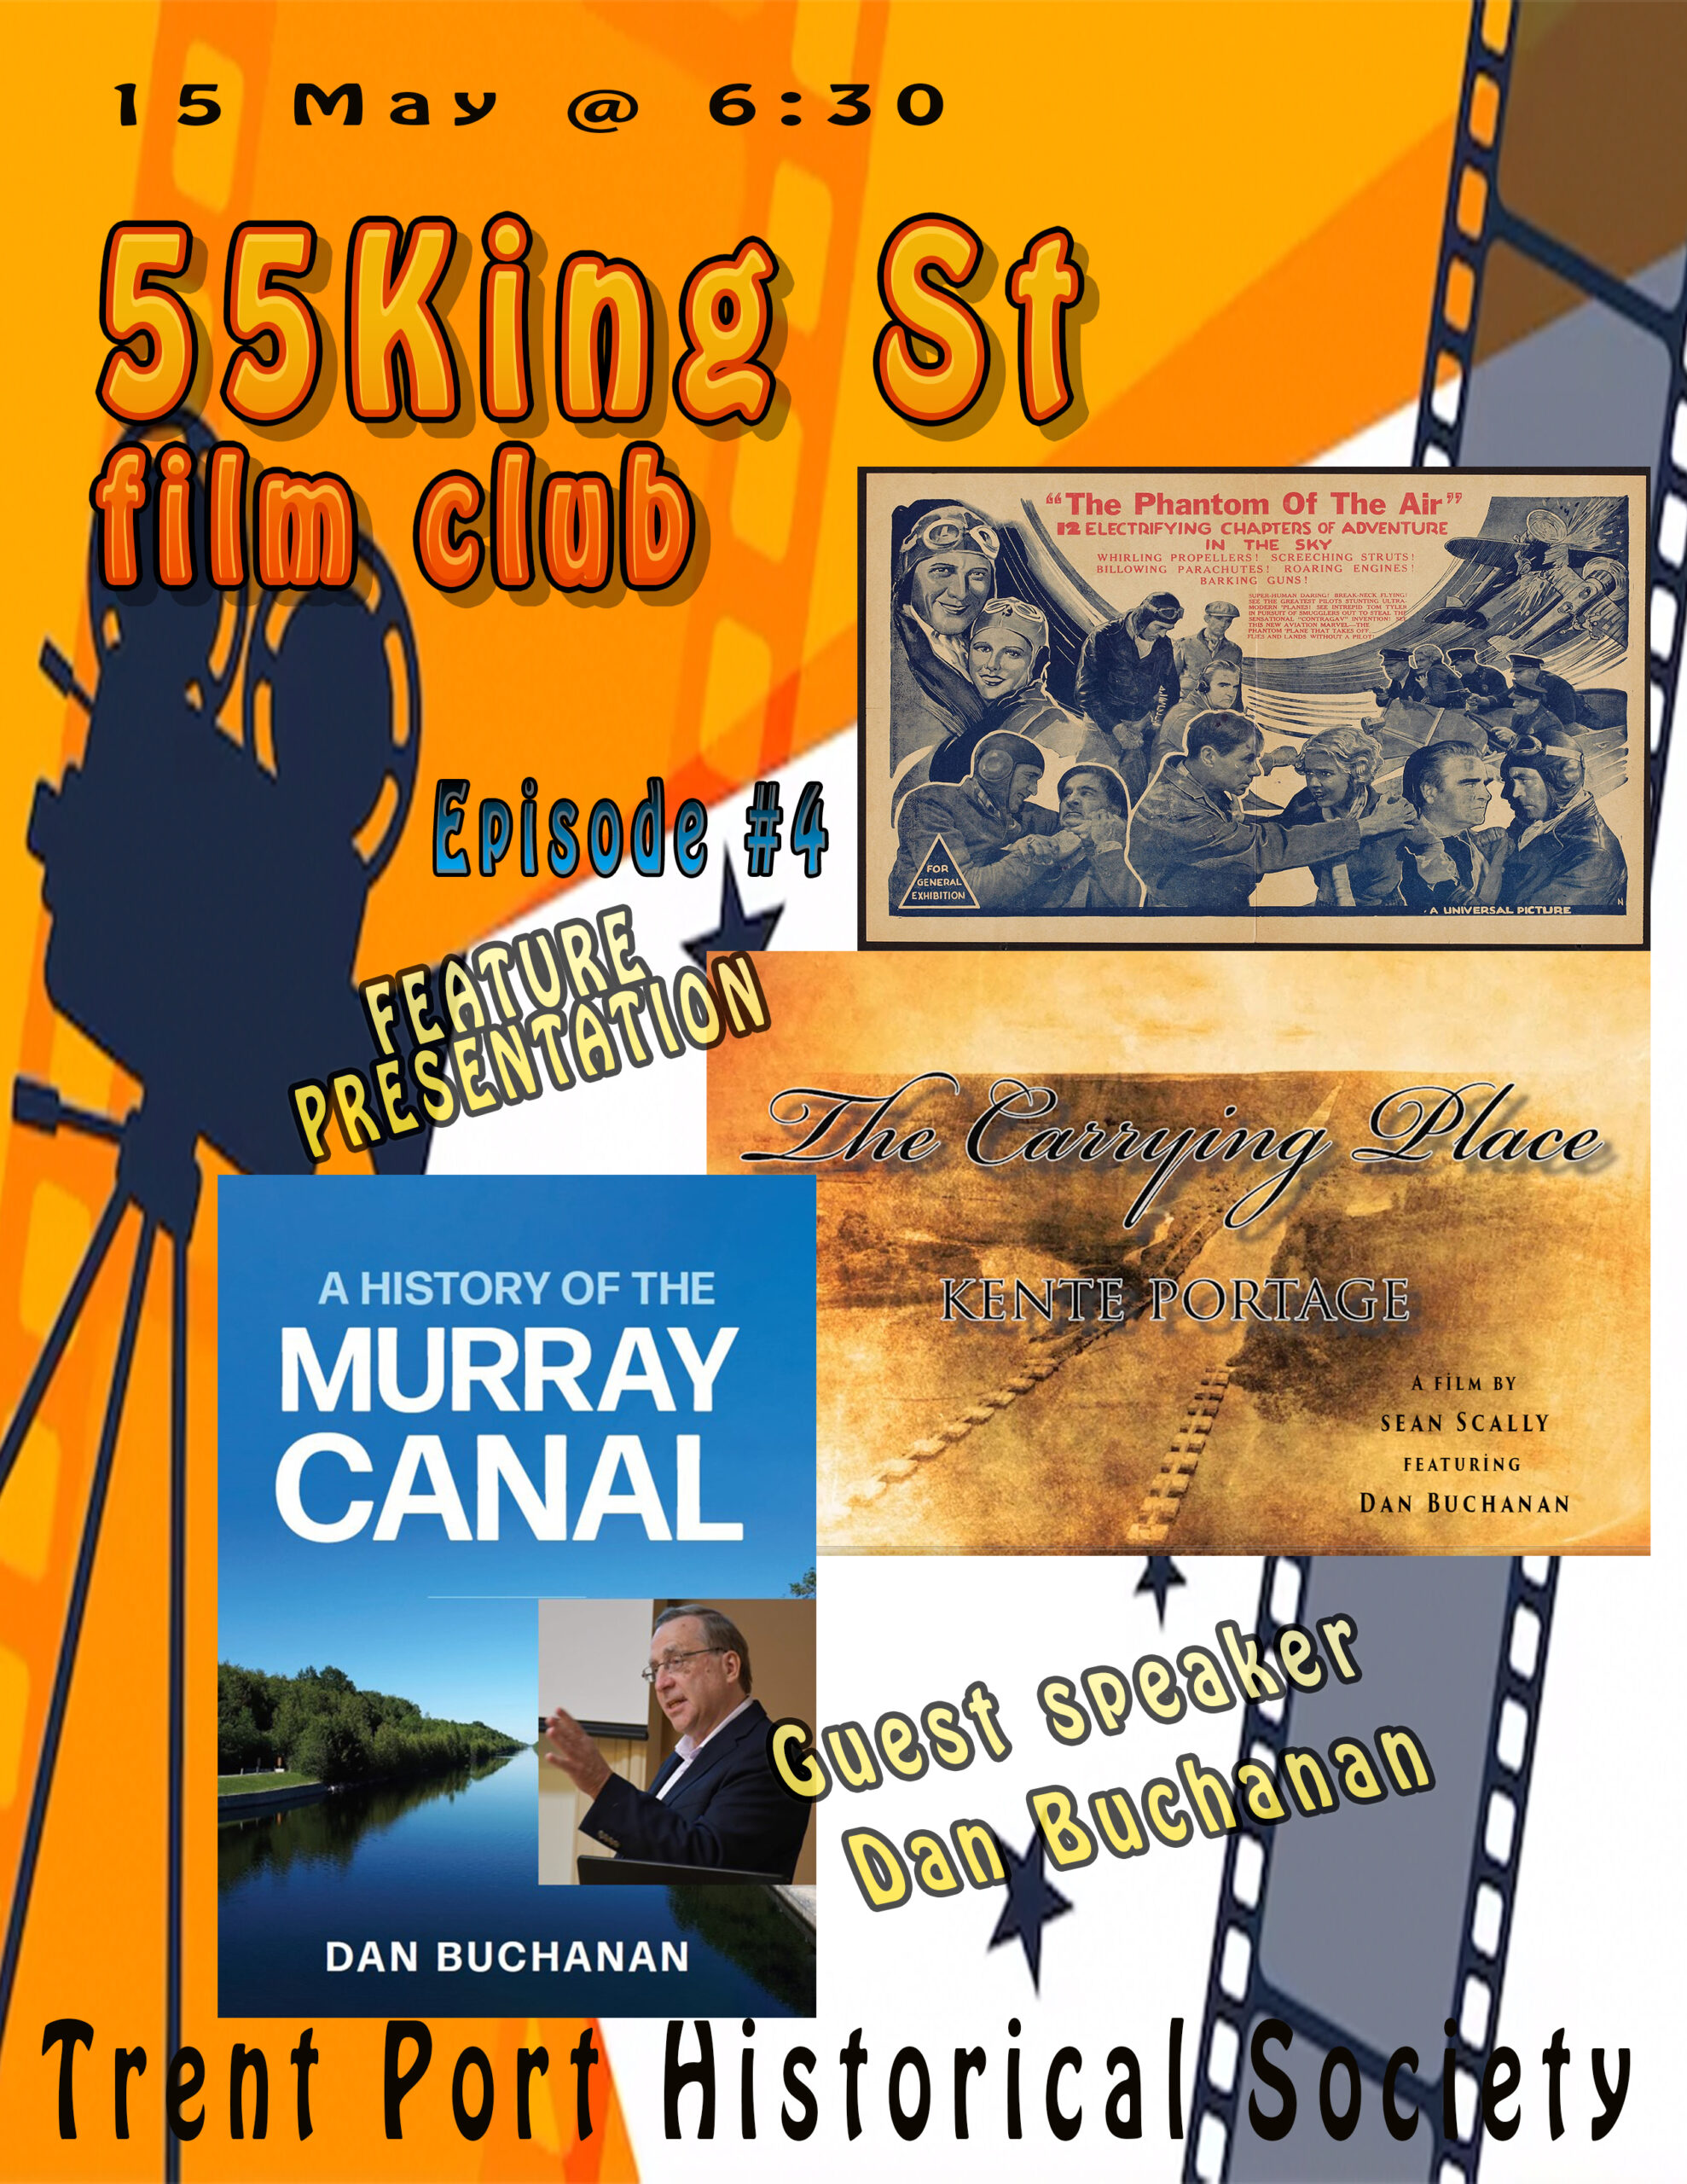 Poster for event with details and photo of book cover titled "Murray Canal"